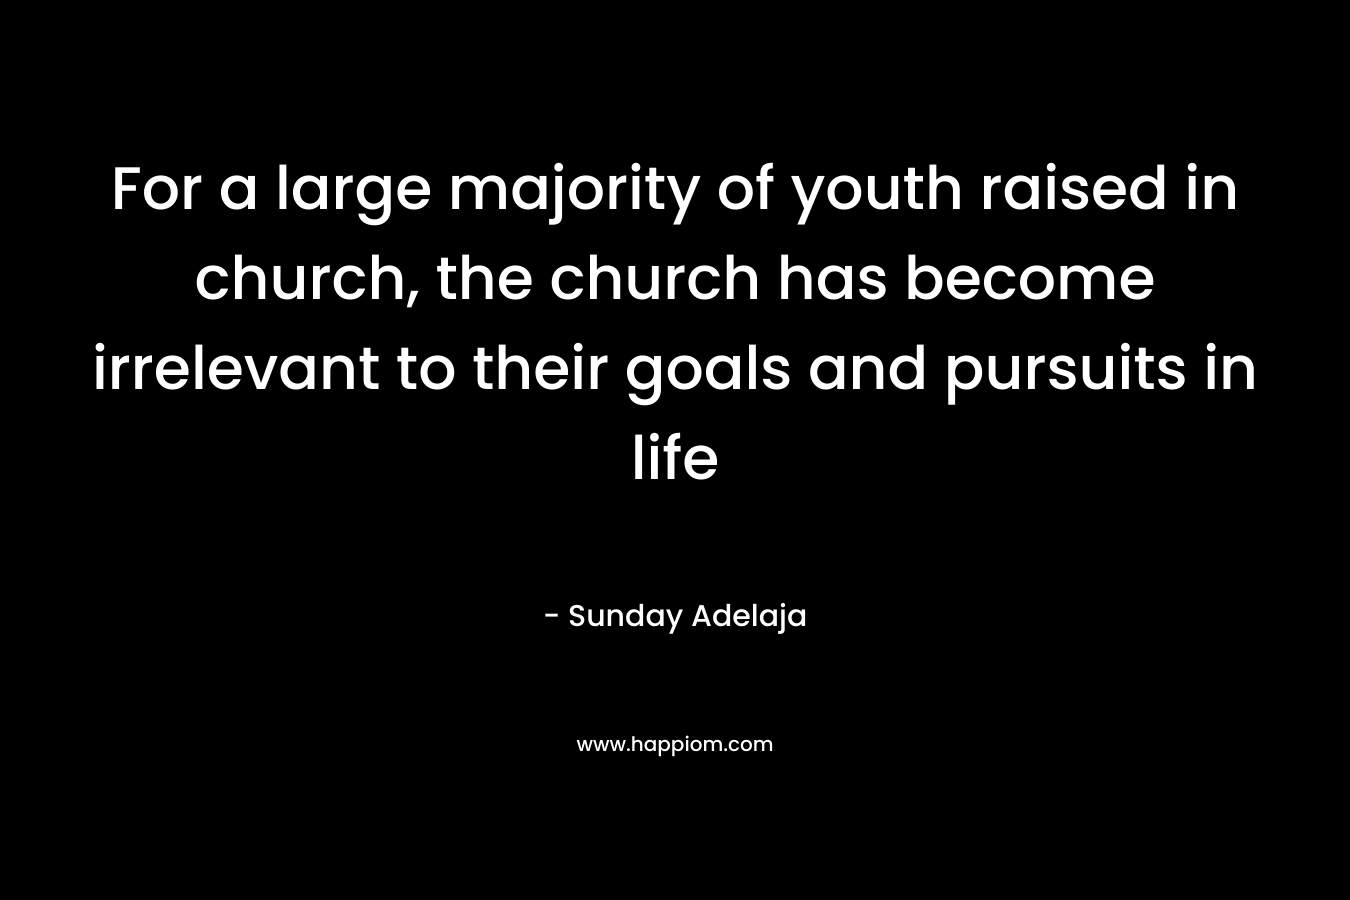 For a large majority of youth raised in church, the church has become irrelevant to their goals and pursuits in life